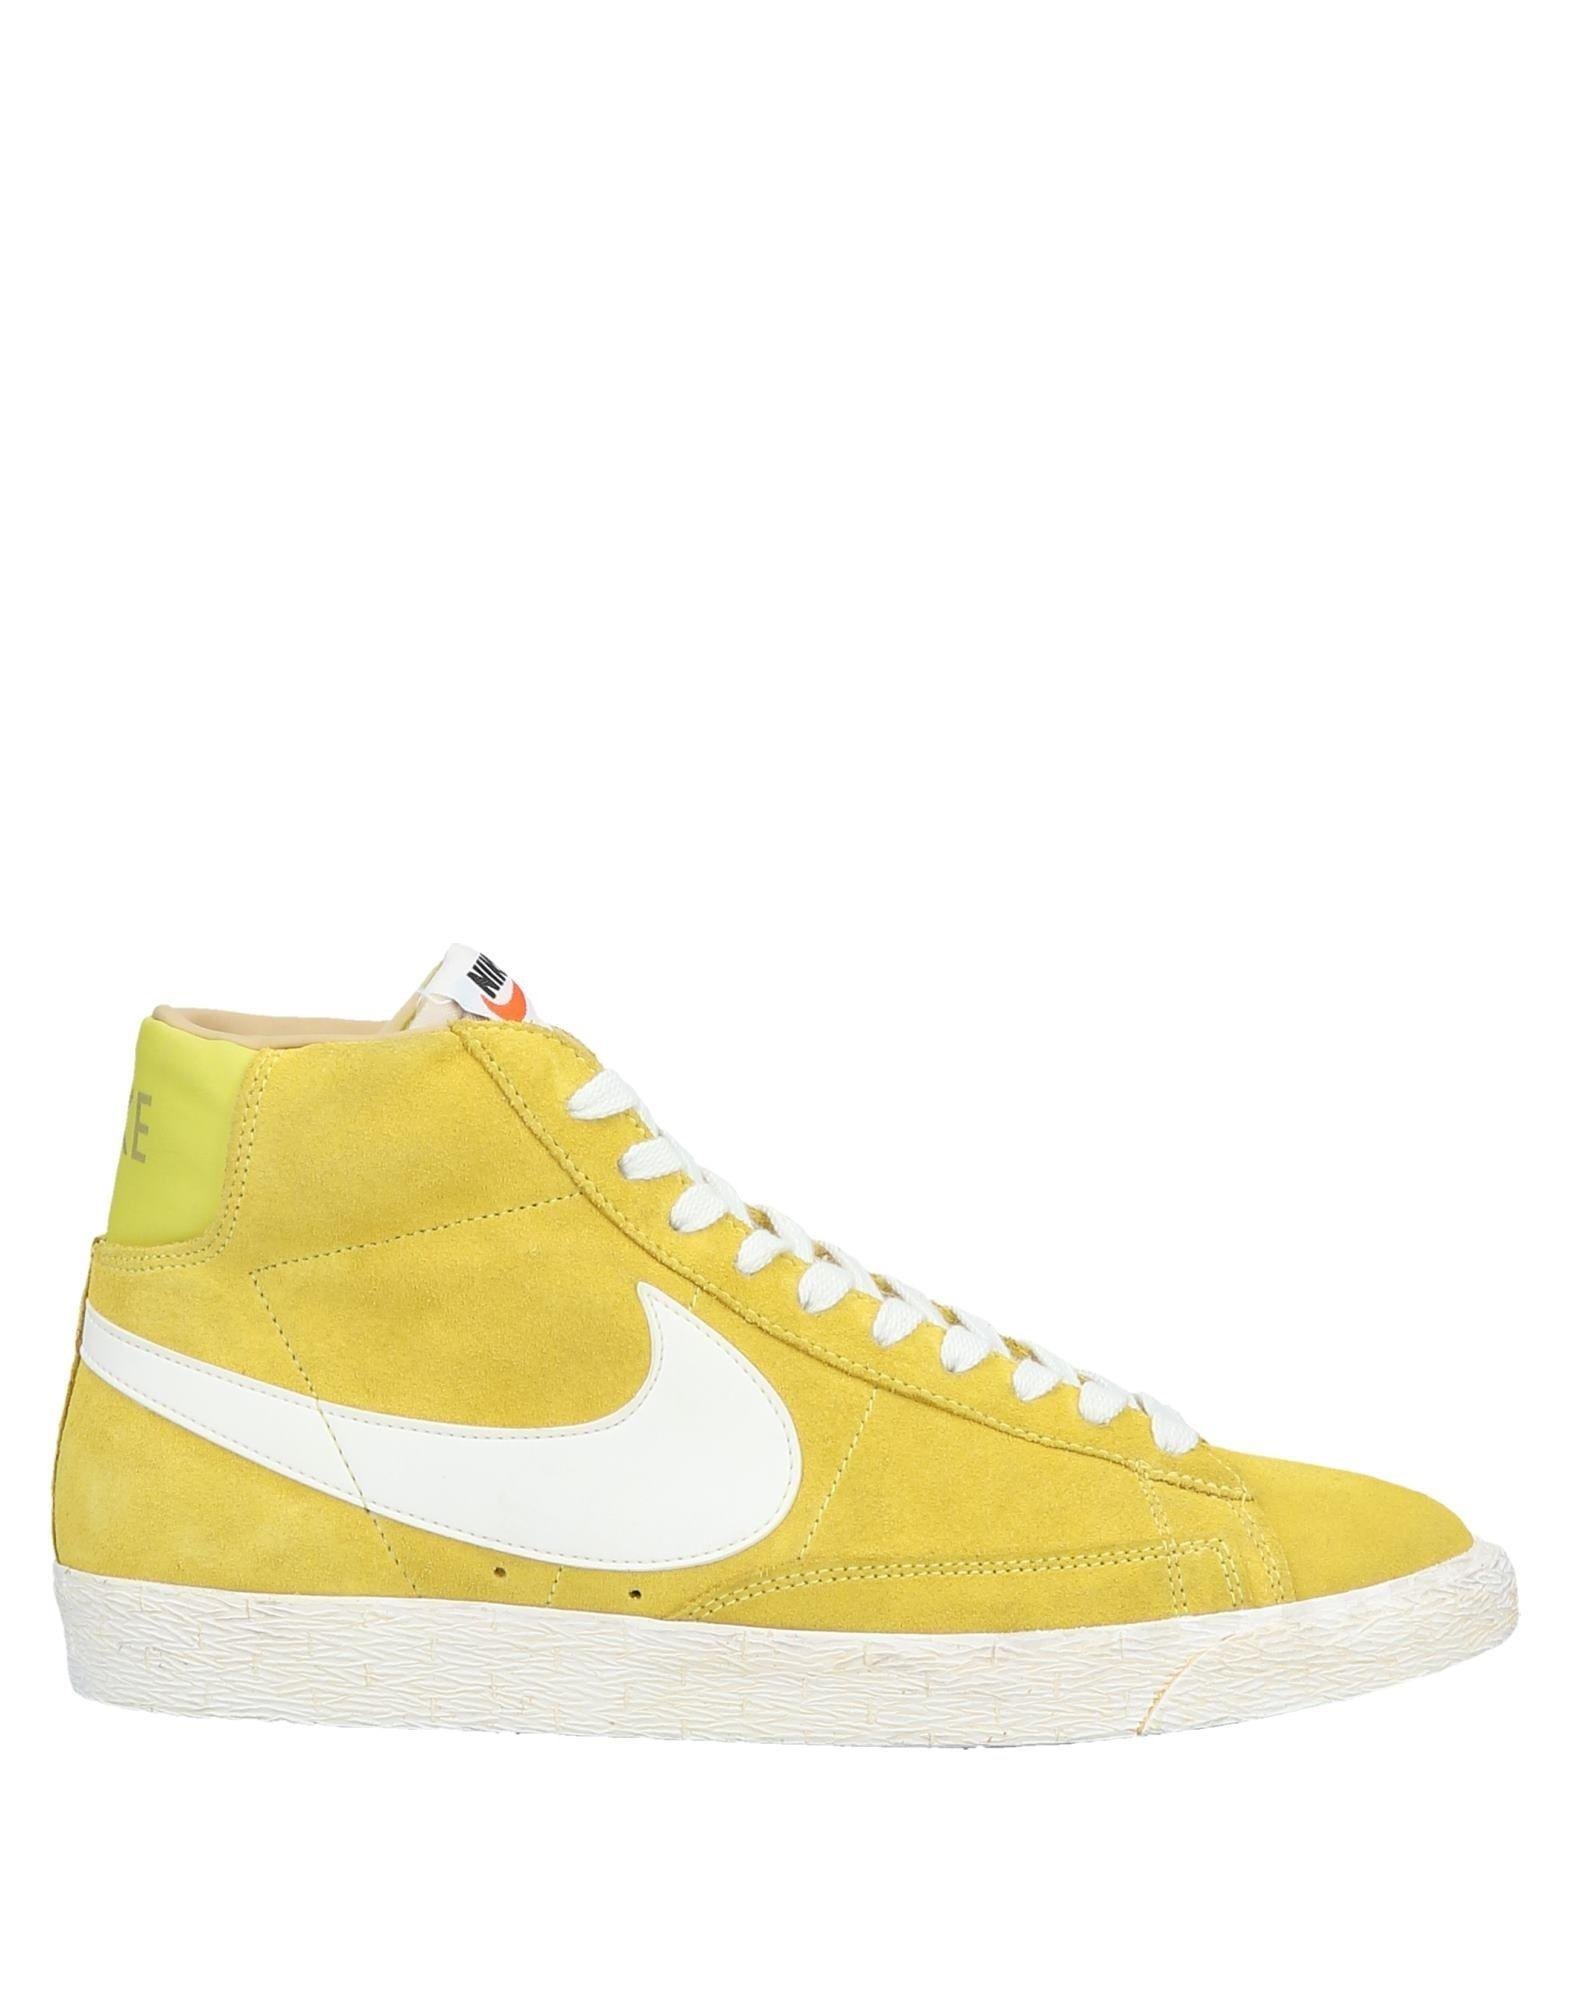 Nike High-tops & Sneakers in Yellow for Men | Lyst